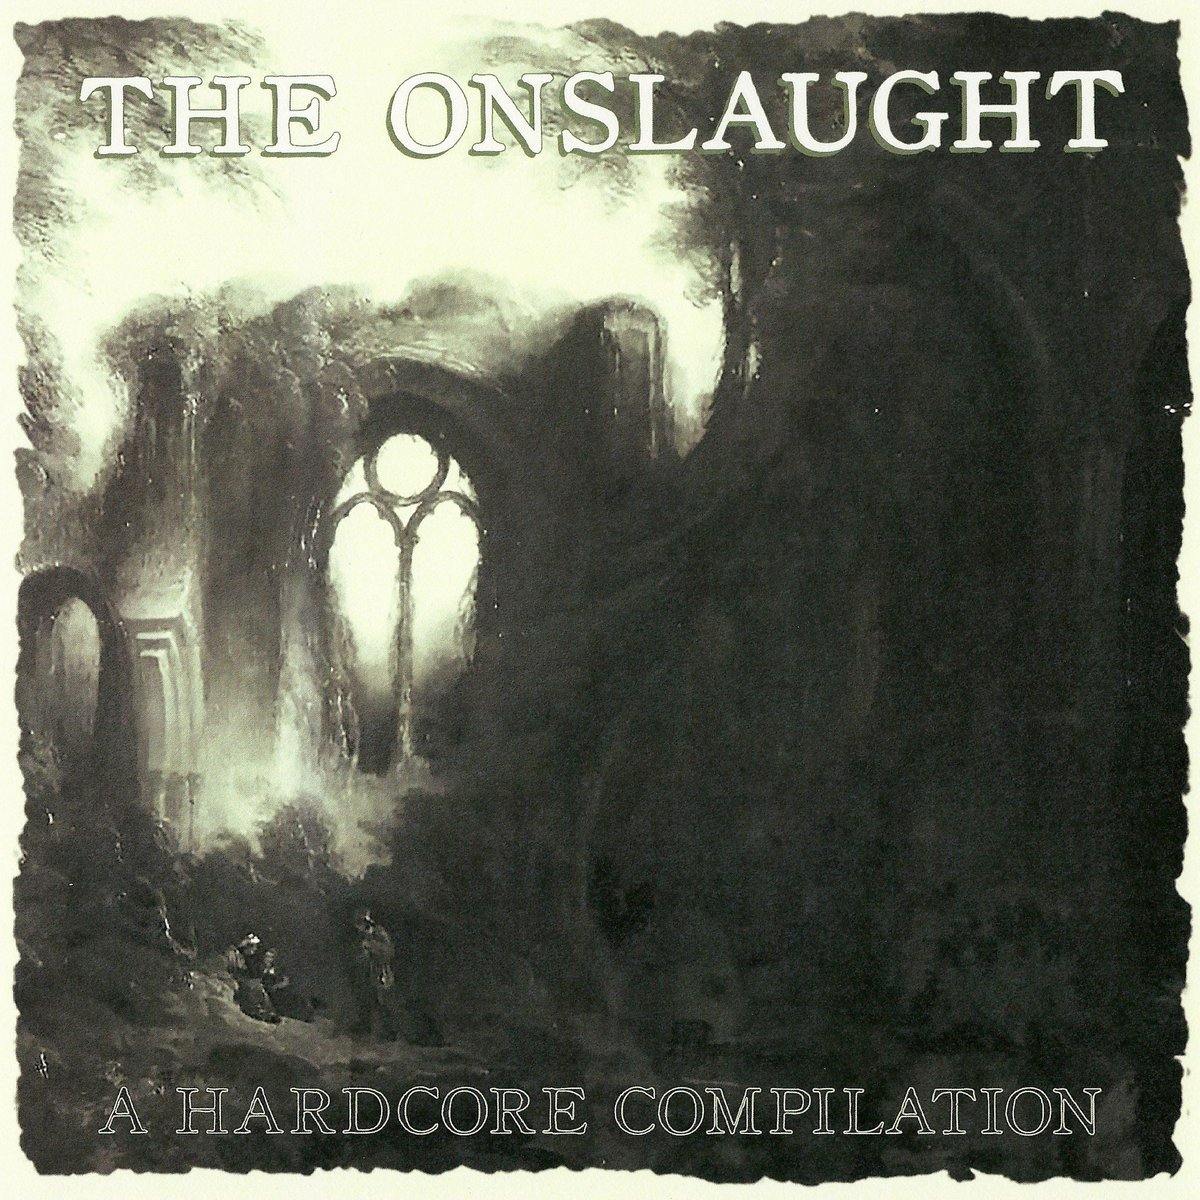 Buy – The Onslaught: A Hardcore Compilation 7" – Band & Music Merch – Cold Cuts Merch